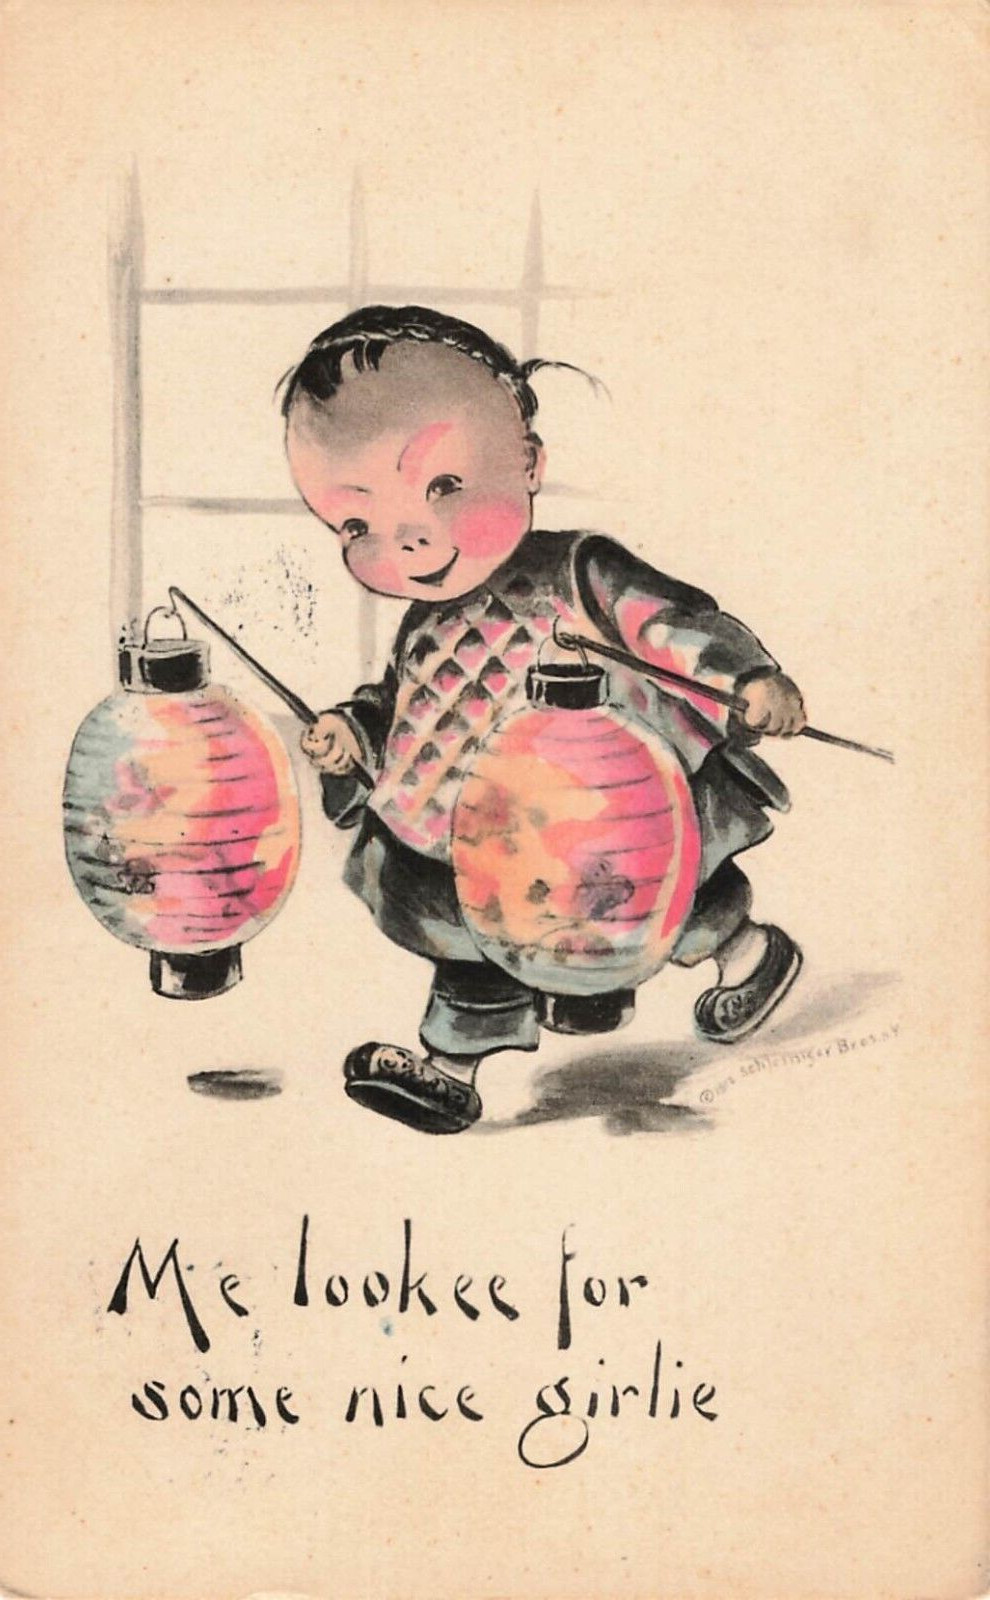 Vintage Postcard - 1914/  posted -  Asian artwork - me lookee  - 1 cent stamp